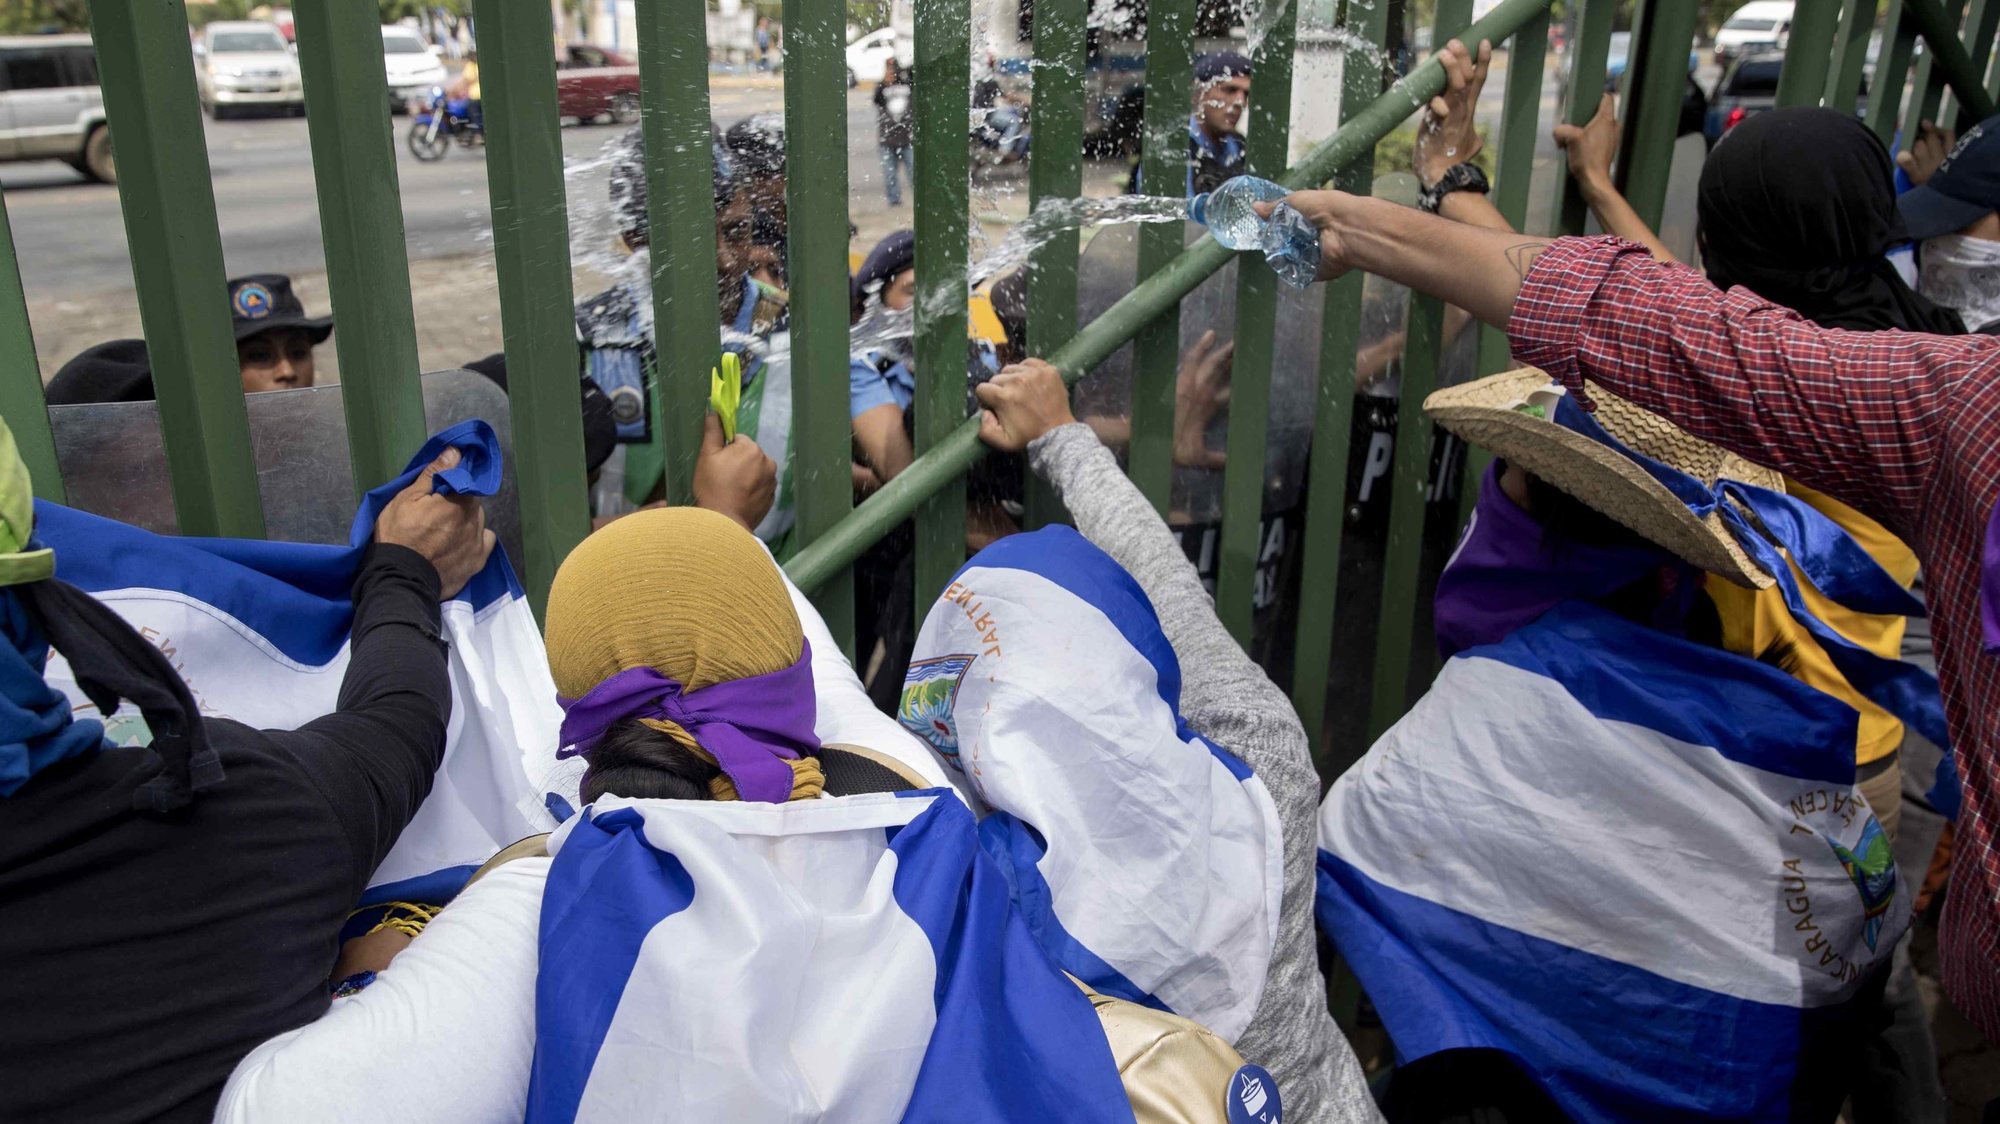 epa08010133 Students throw water at riot agents during a protest demanding the release of political prisoners at the Universidad Centroamericana (UCA), in Managua, Nicaragua 19 November 2019.  EPA/Jorge Torres